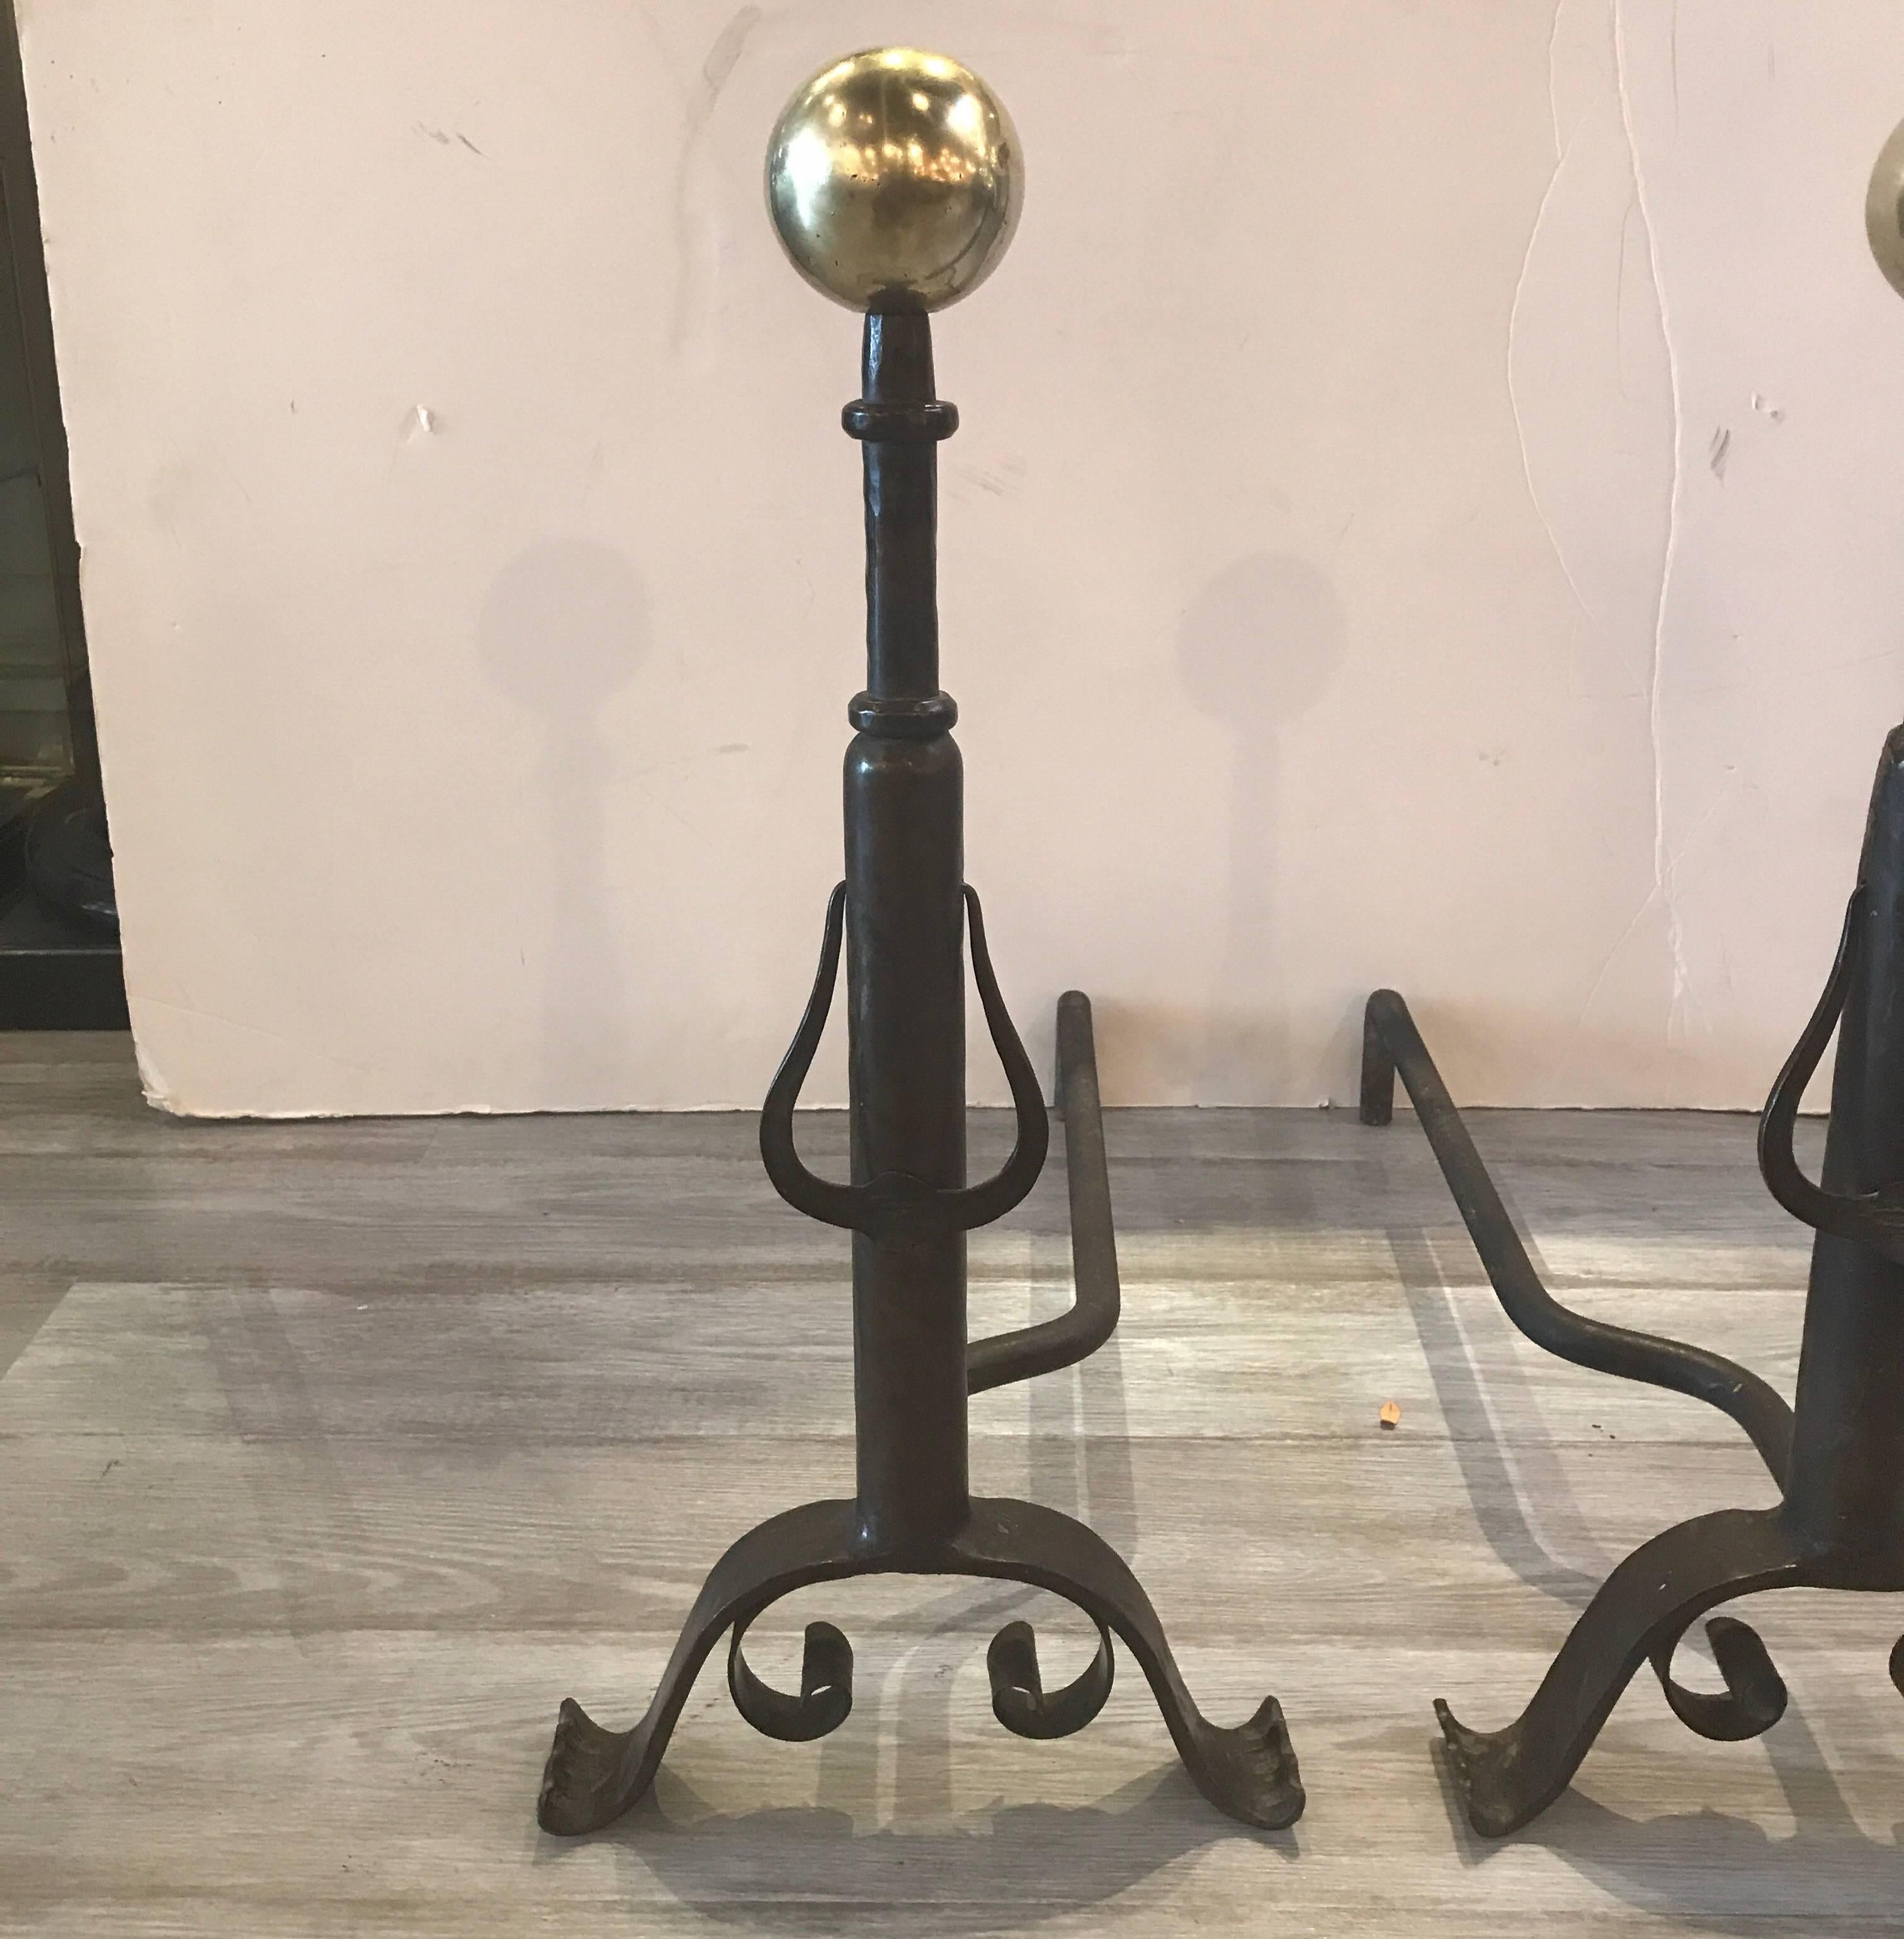 A Pair of late 19th century hand-hammered andirons. The polished cannon ball tops with patinated columns and iron back supports. The center column with a door knocker style pendant.